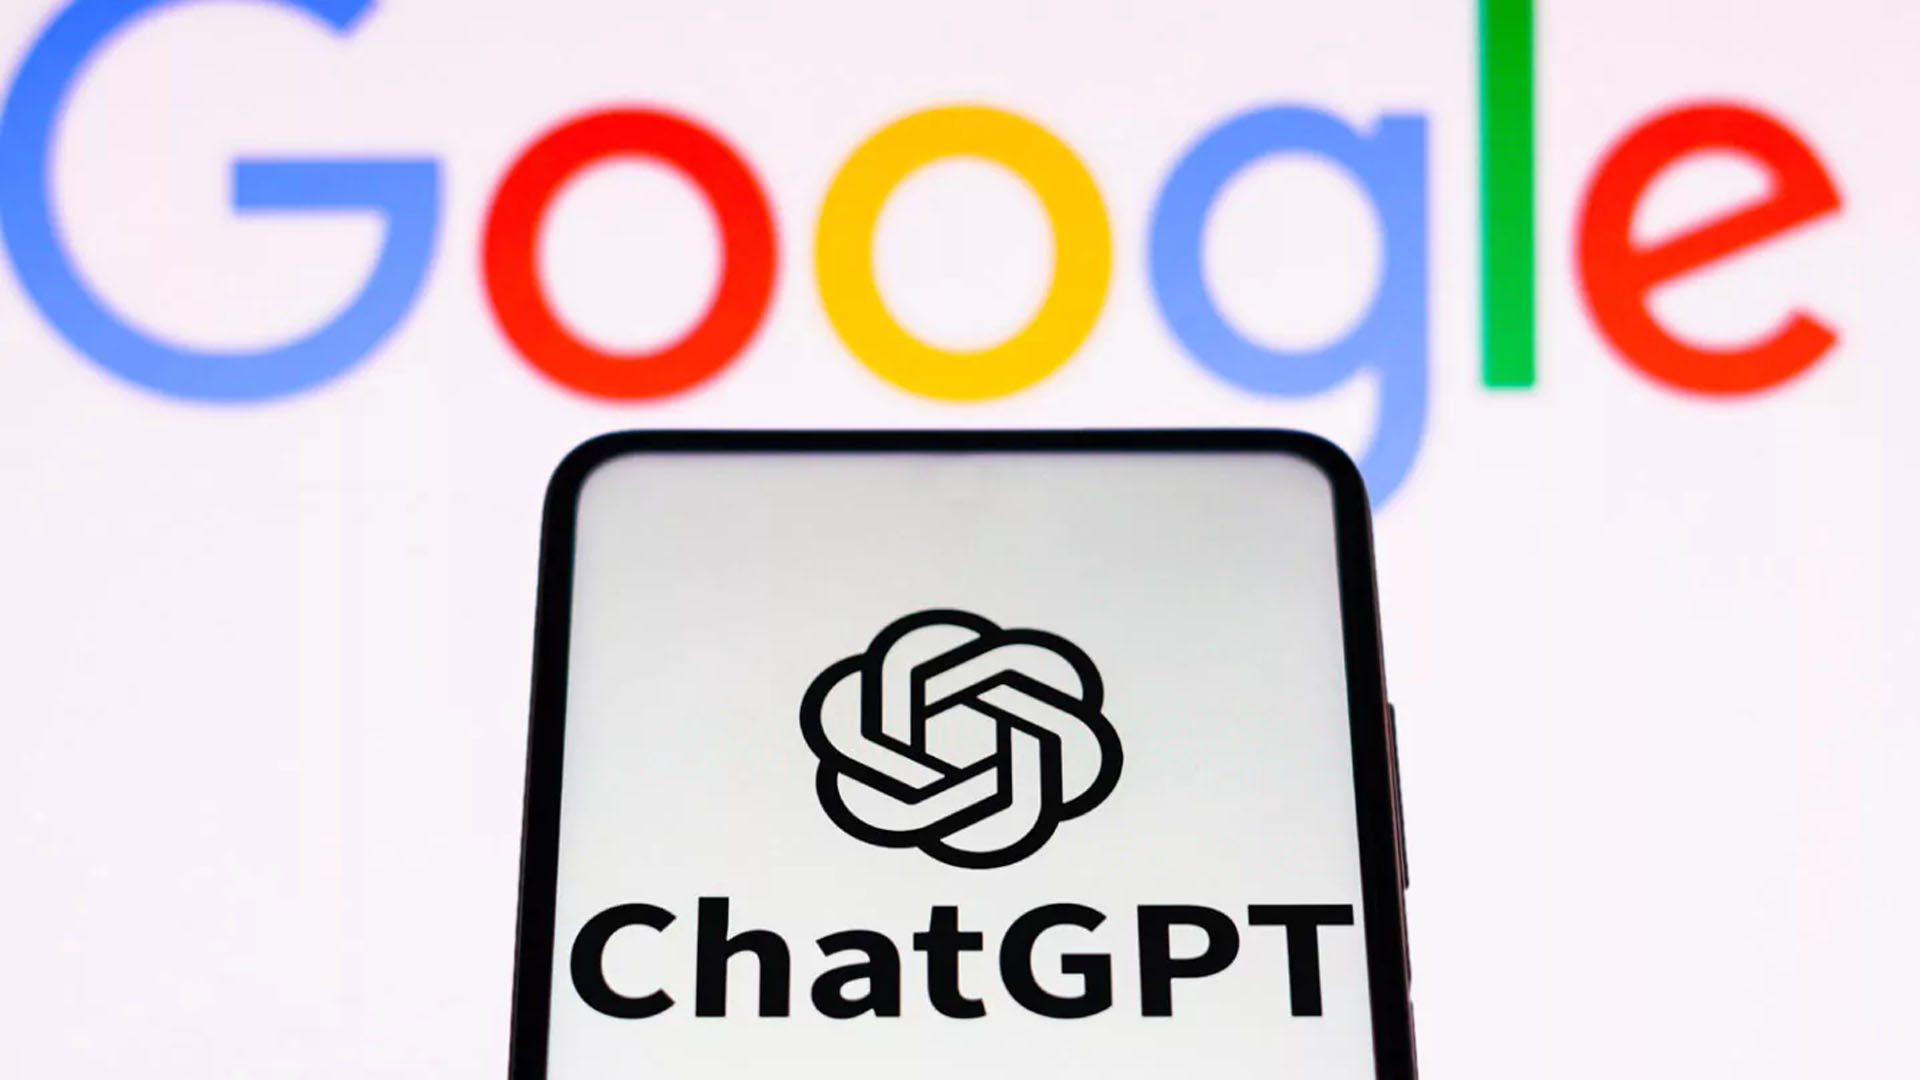 ChatGPT’s Search Engine Will Compete With Google’s As per the Later Rumor